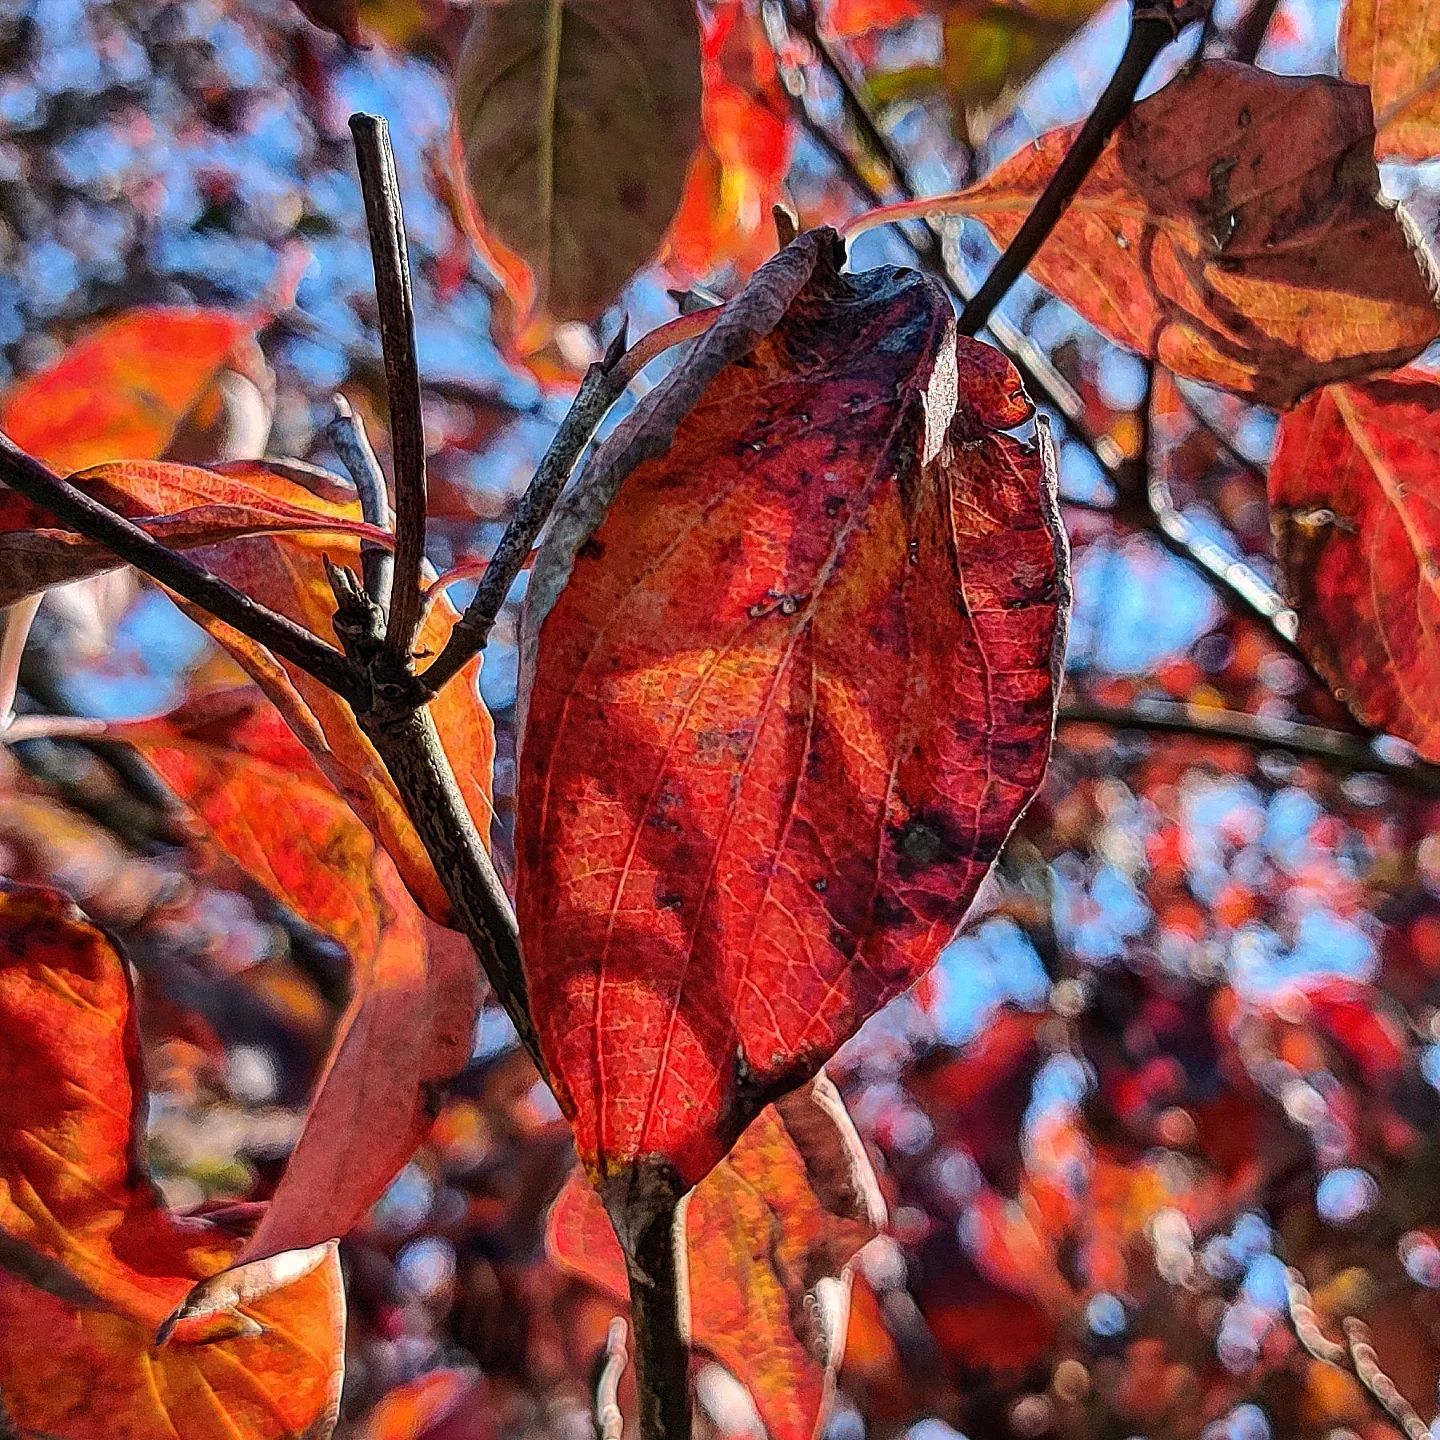 Red

#autumn #redleaves